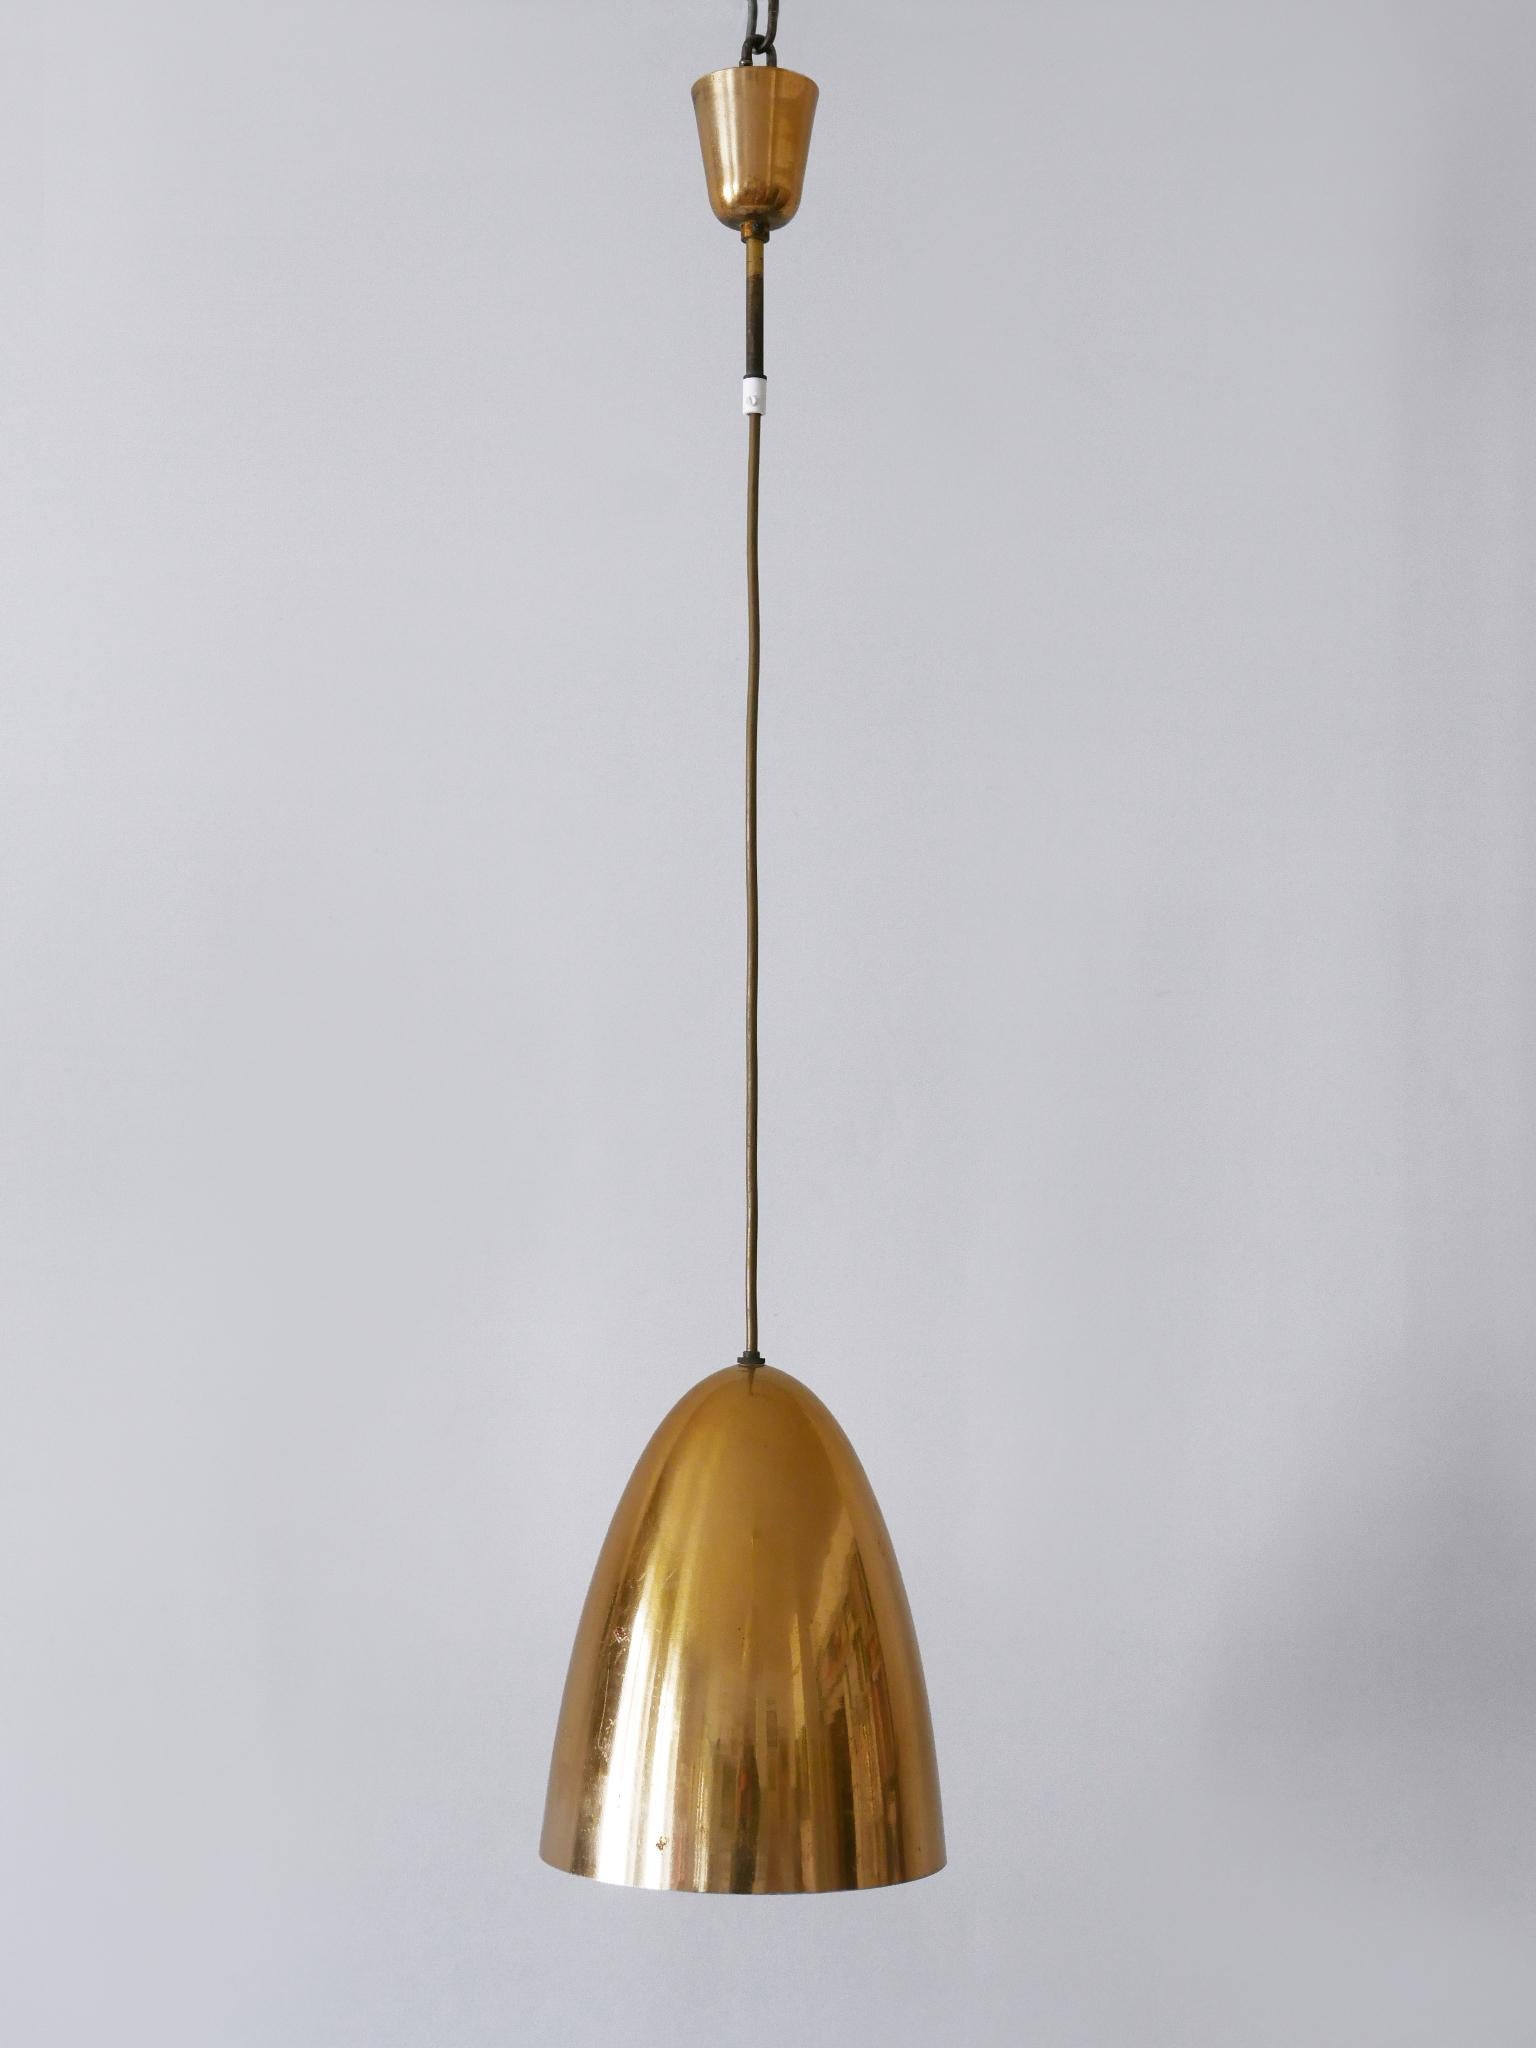 Anodized 1 of 4 Elegant Mid Century Modern Pendant Lamps or Hanging Lights Germany 1950s For Sale